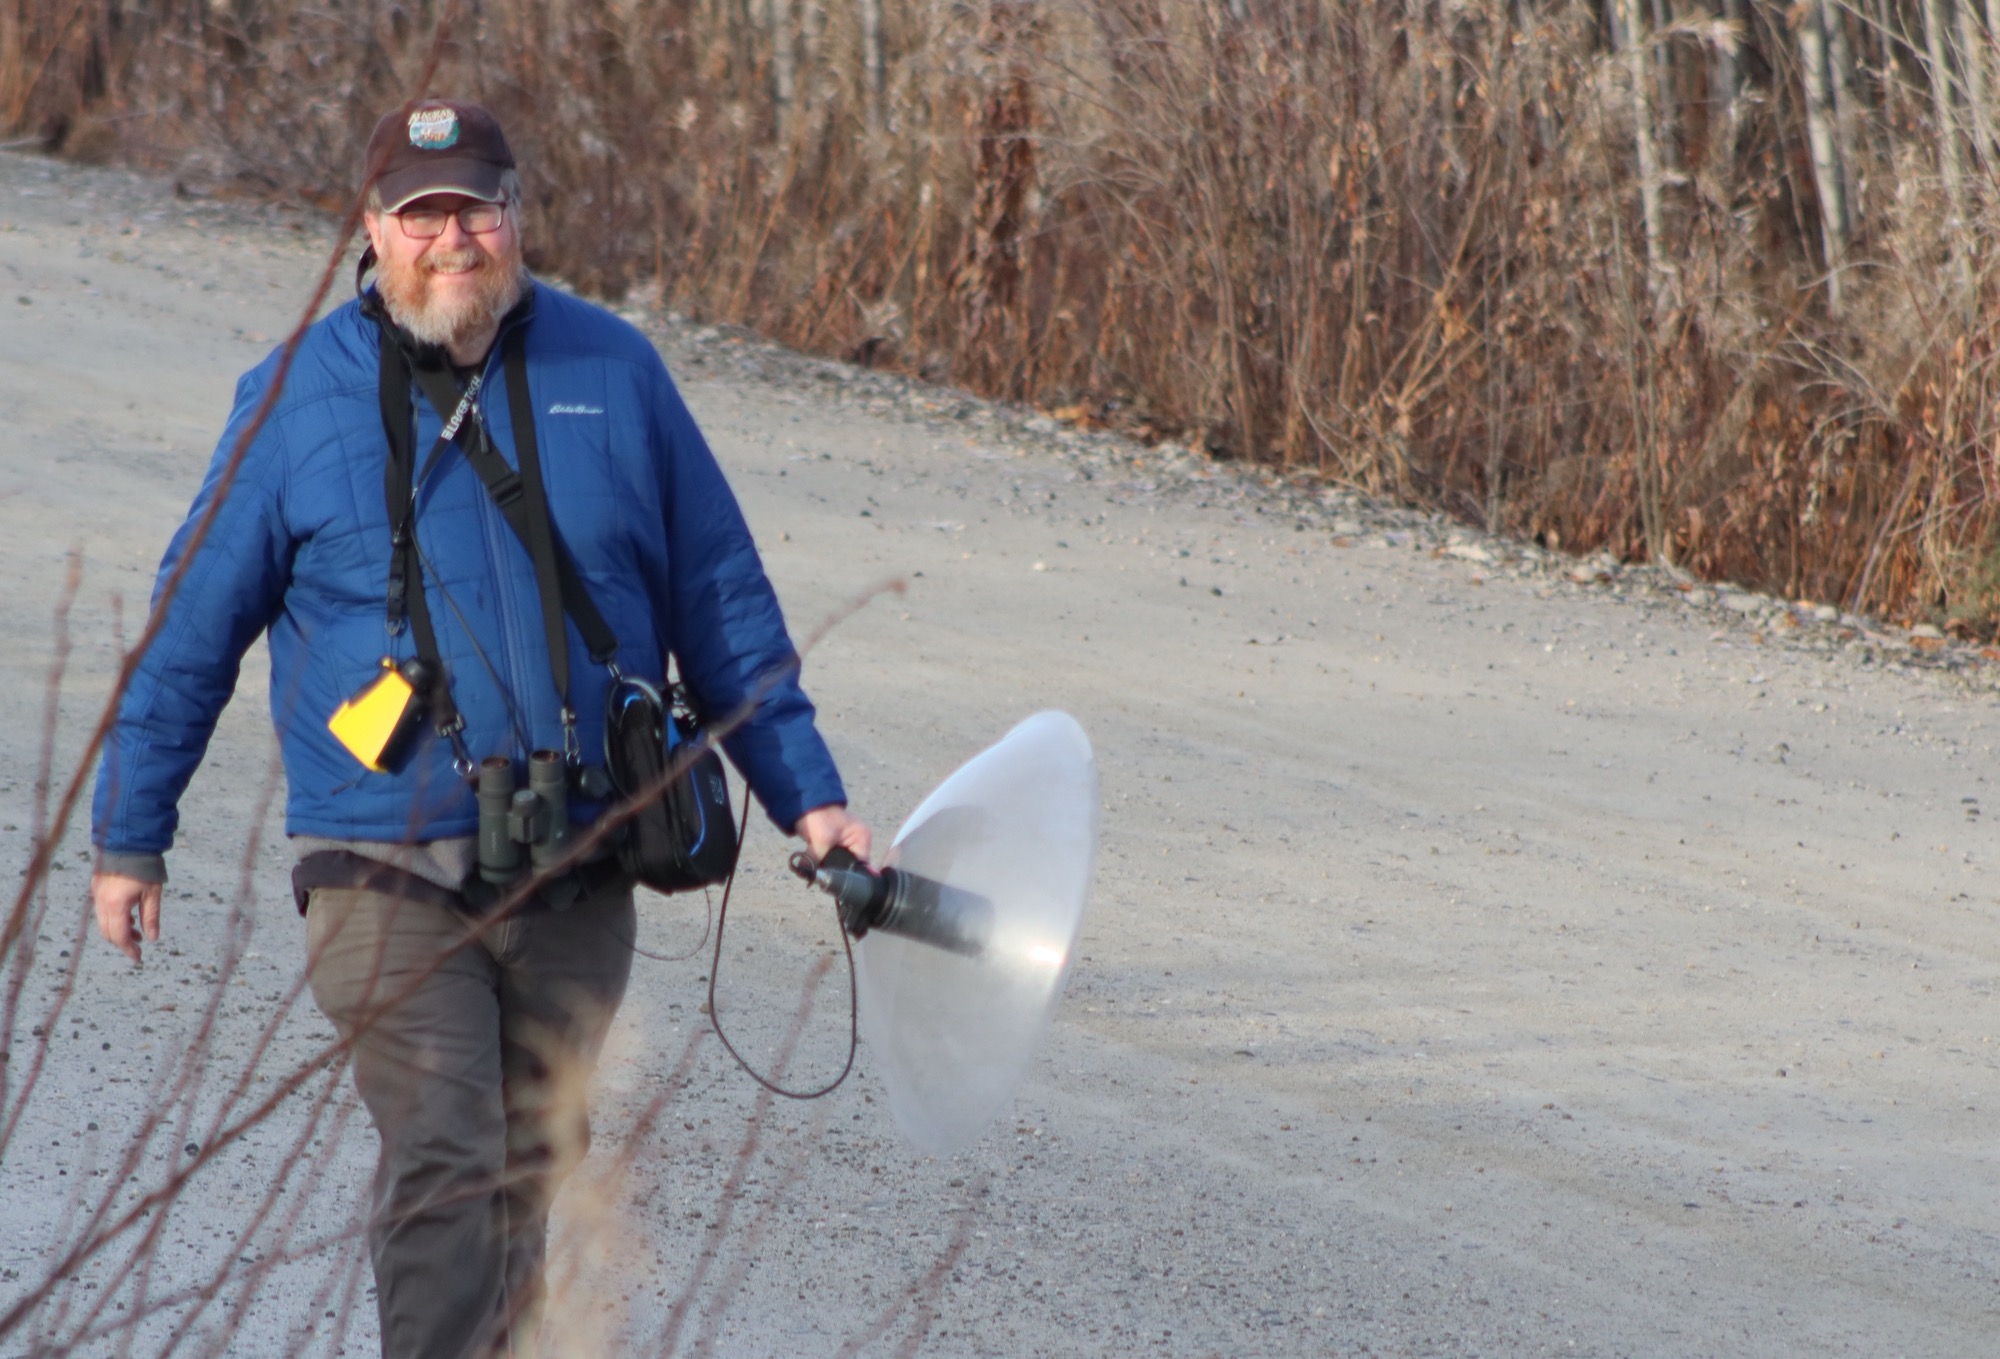 A man in a blue insulated jacket and ball cap walks down a gravel road lined with fall-season brush while carrying a microphone with a dish receiver.